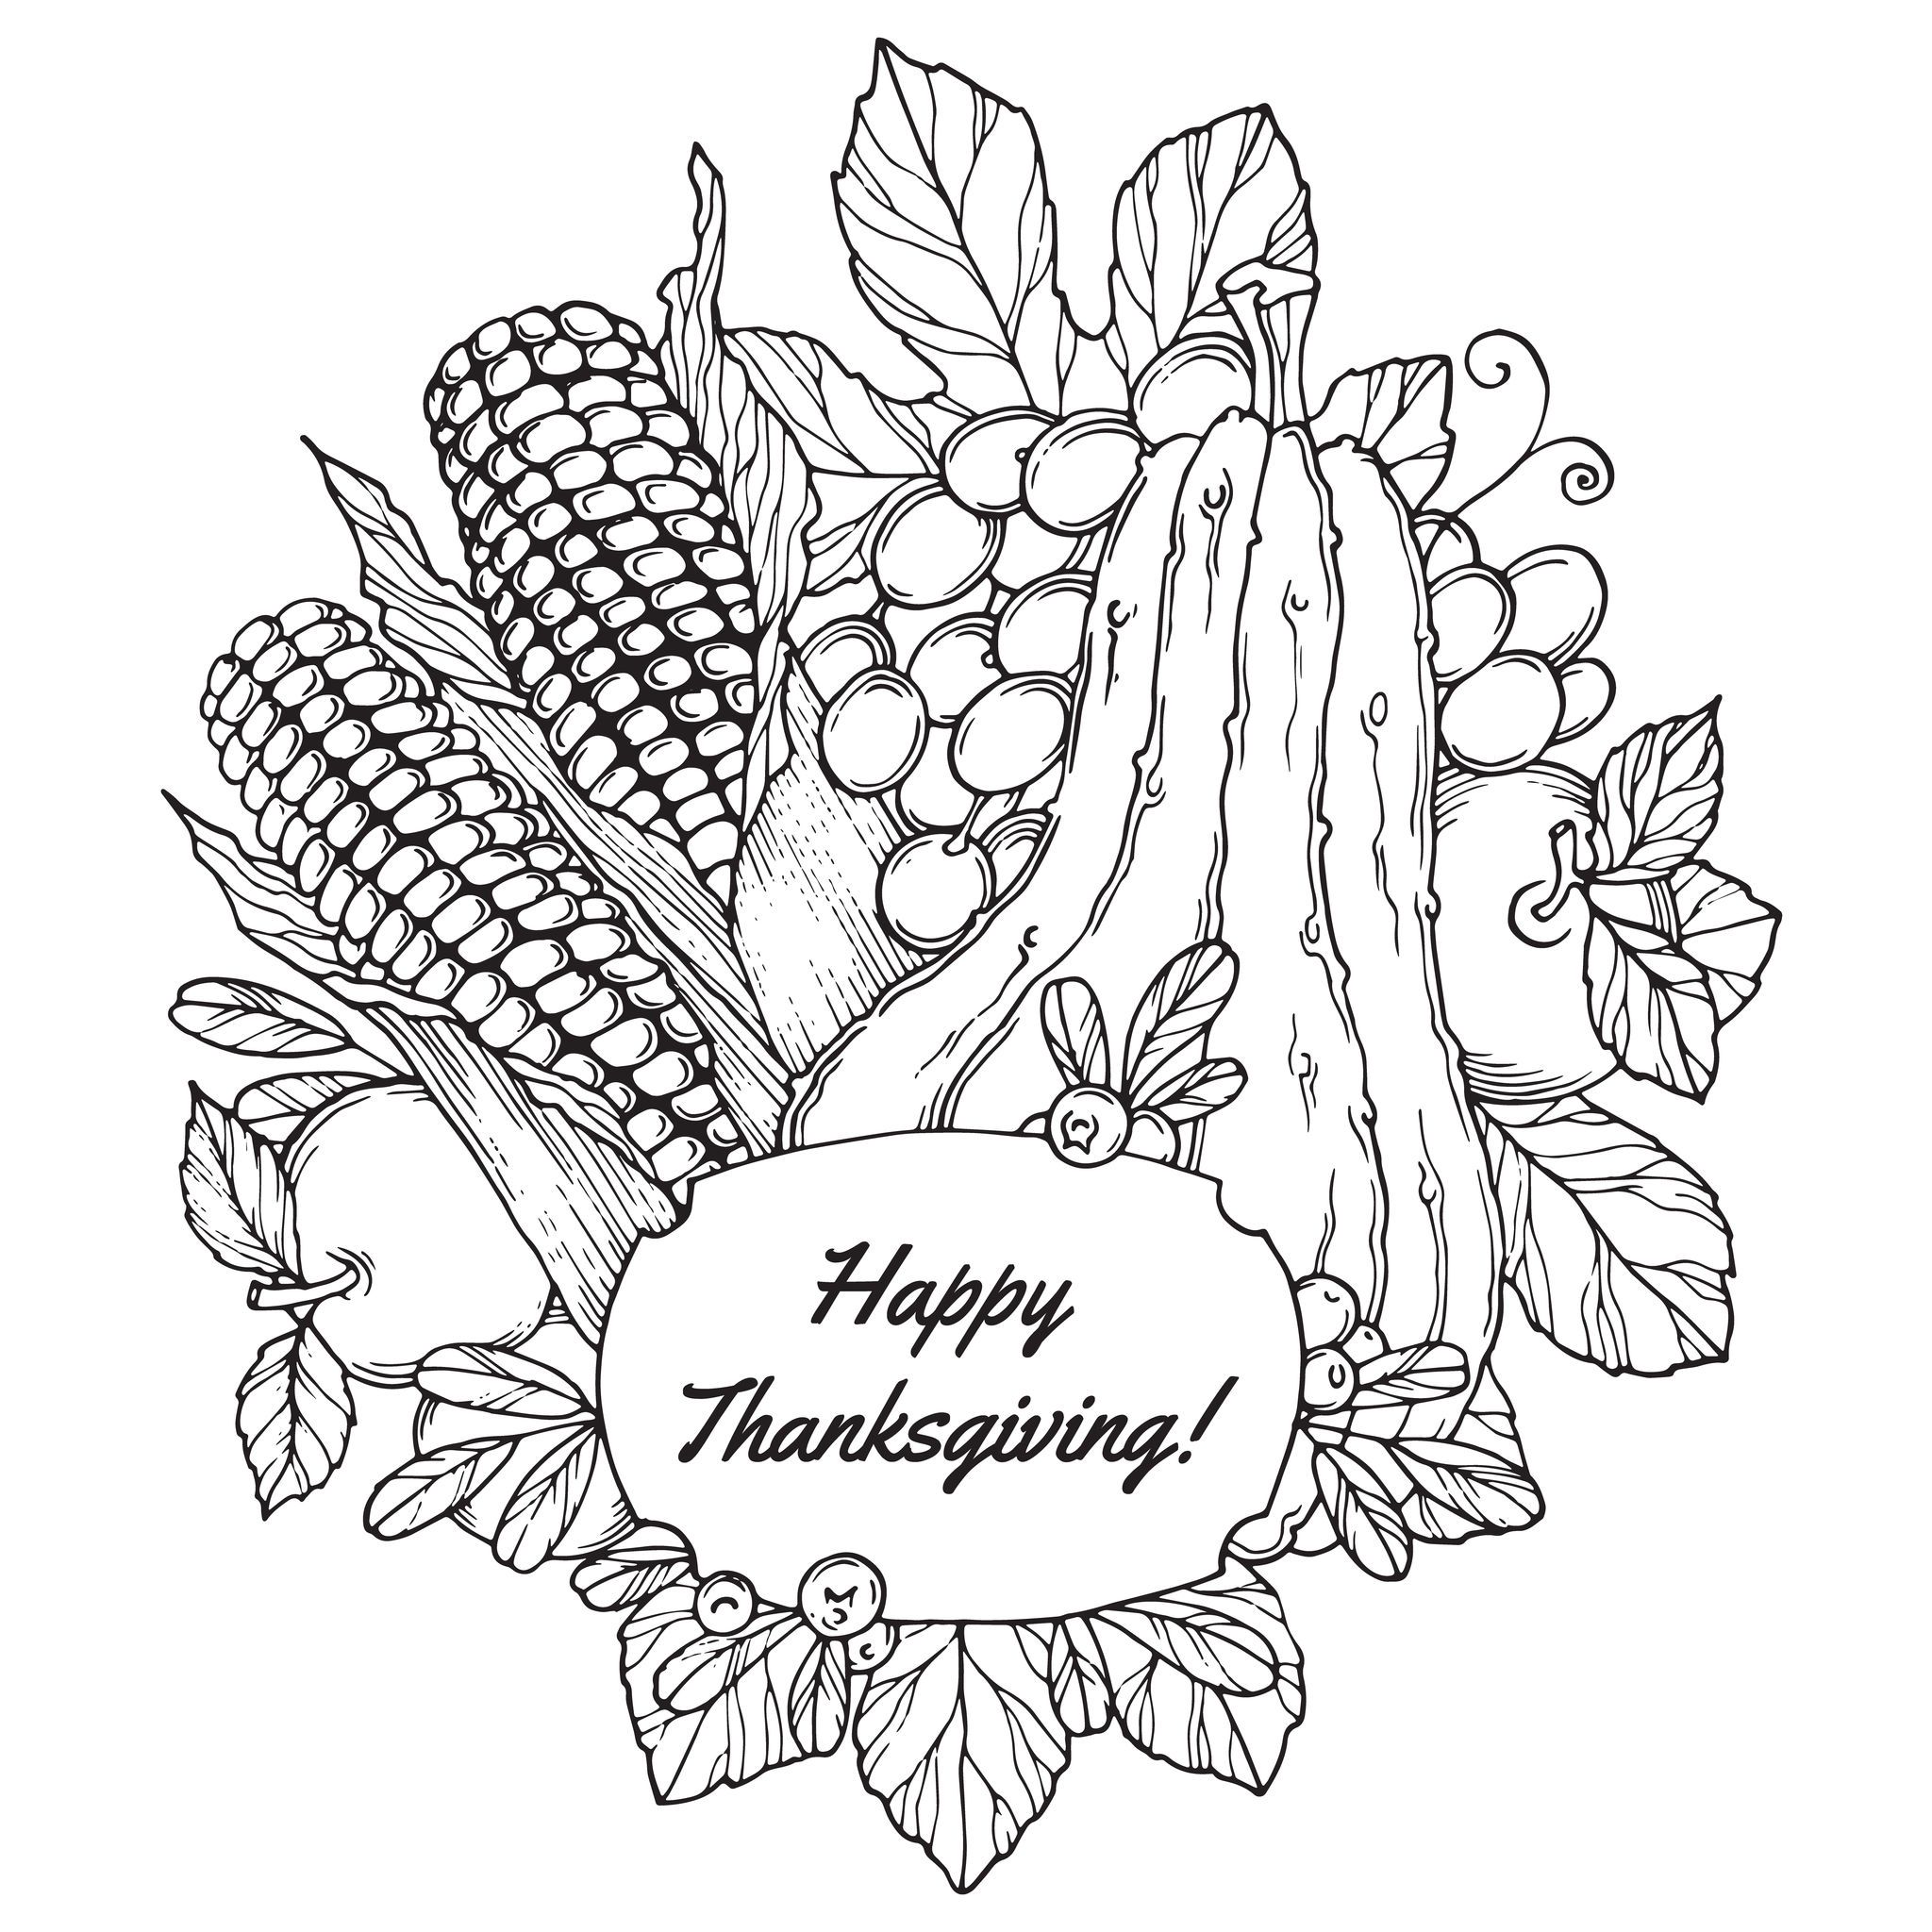 Happy Thanksgiving Coloring Pages - Best Coloring Pages For Kids